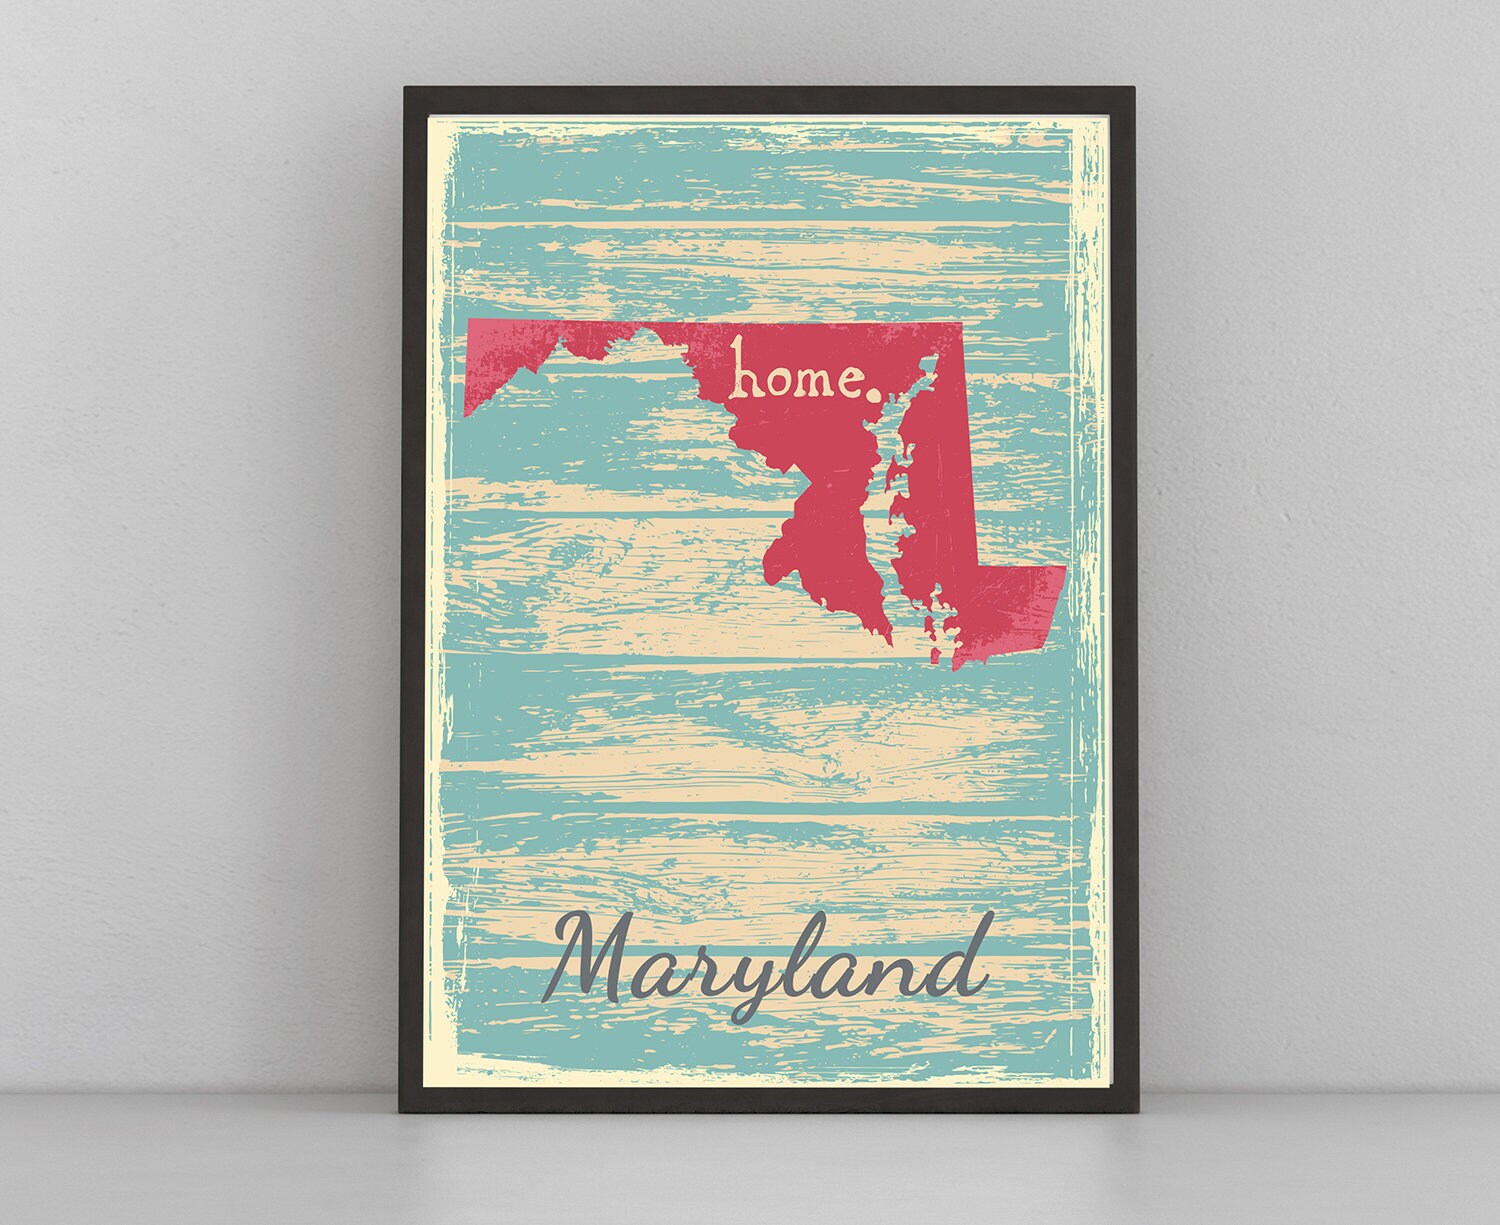 Retro Style Travel Poster, Maryland Vintage State Poster Printing, Home Wall Art, Office Wall  Decor, Poster Prints, Maryland State Poster